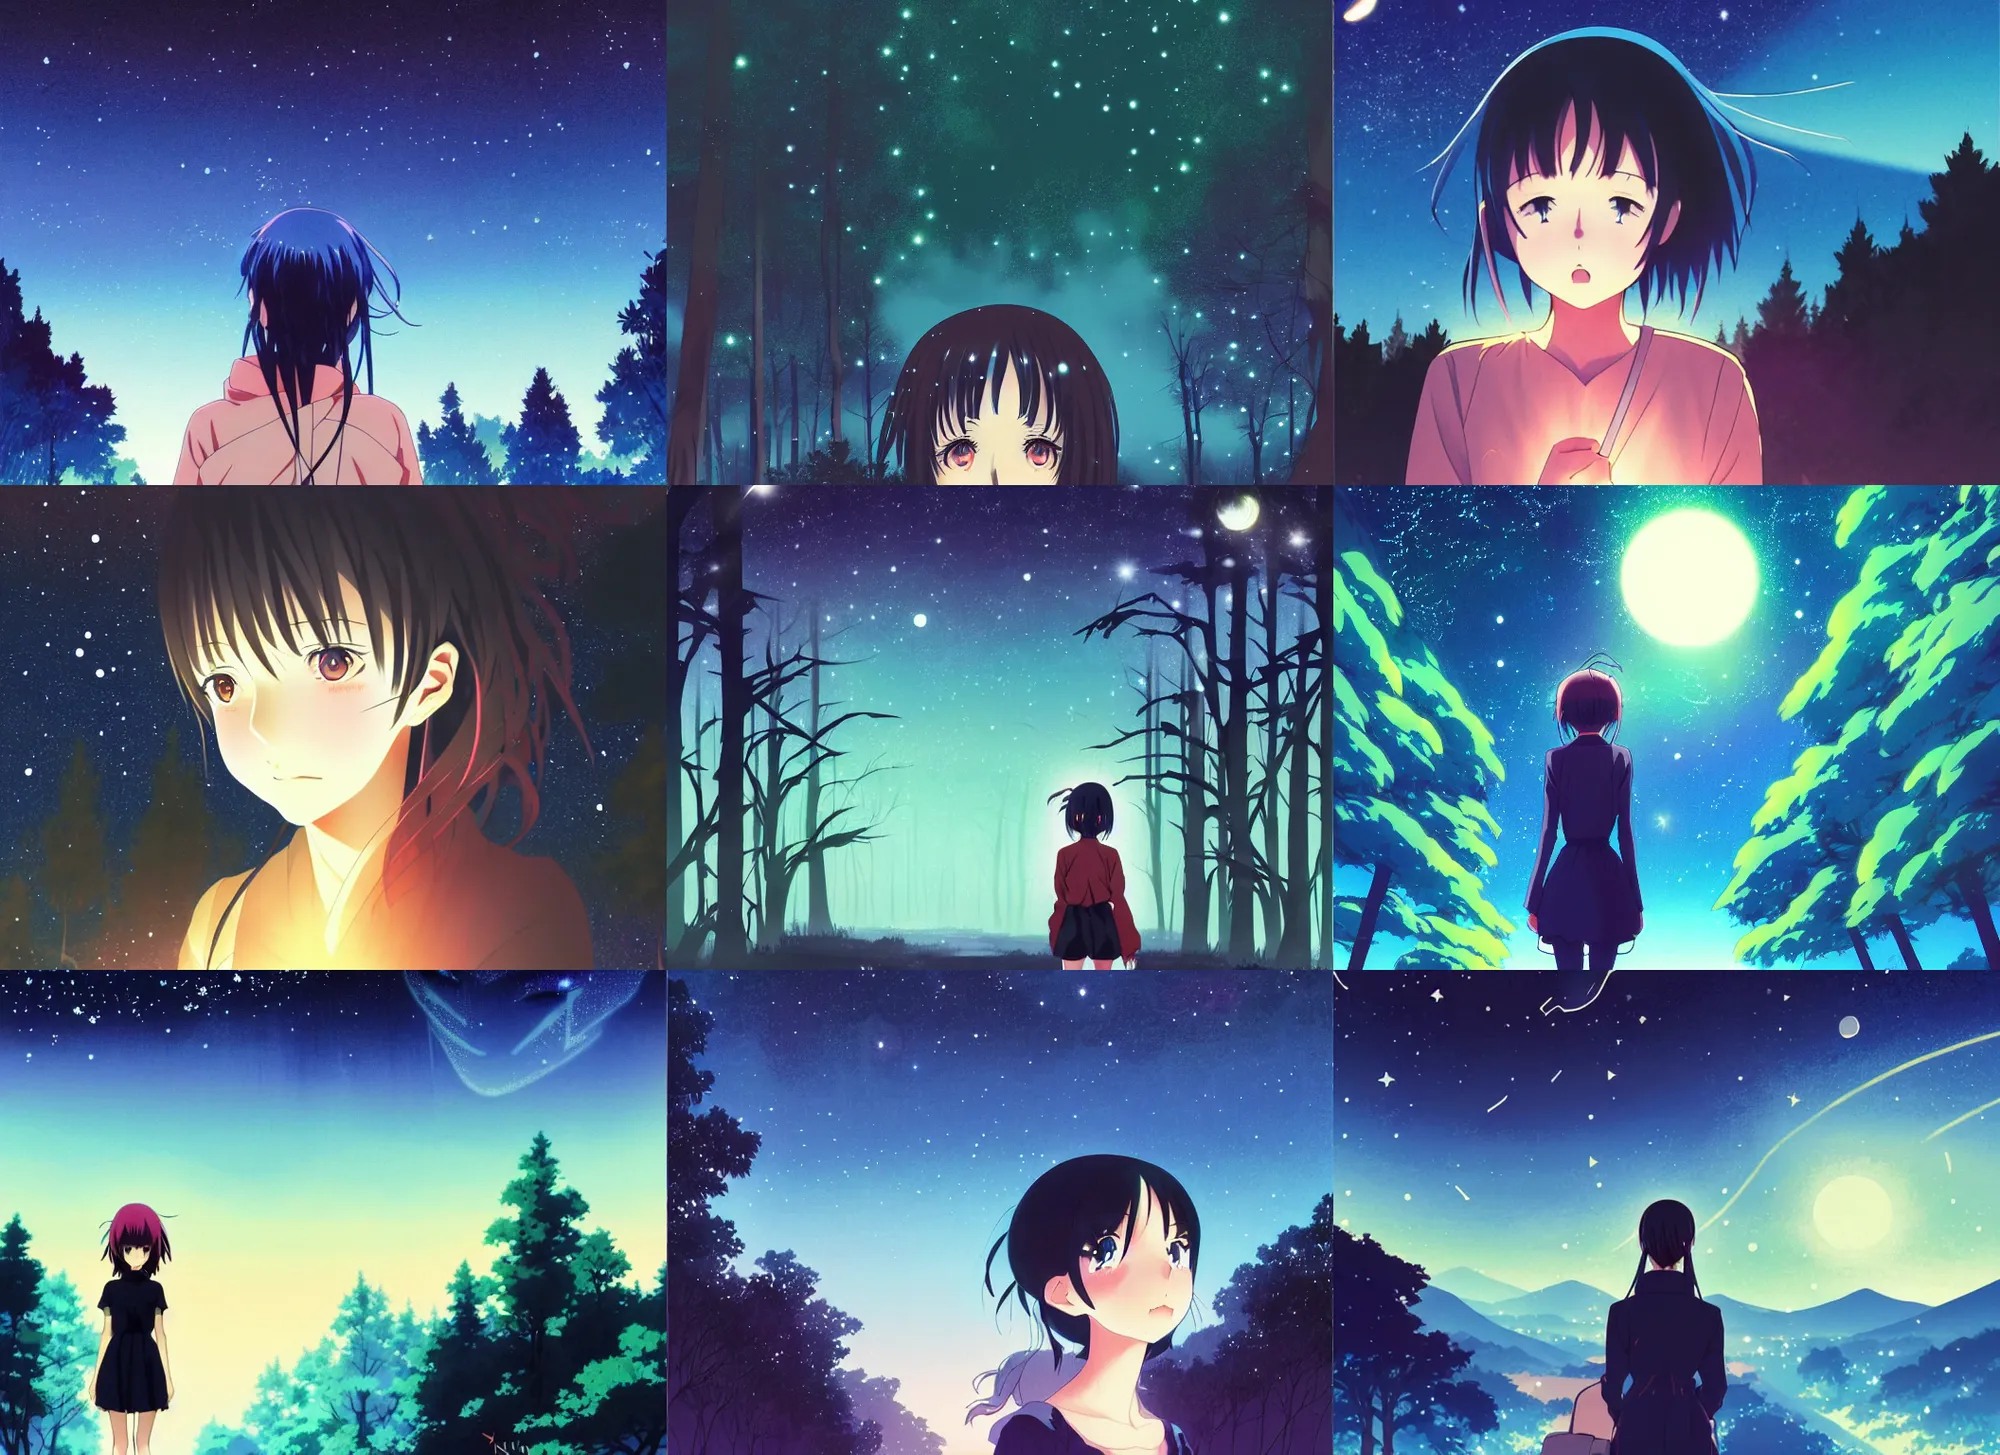 Prompt: anime cels, anime key visual, young woman traveling in a forest at night, night sky, nebula, very dark, cute face by ilya kuvshinov, yoh yoshinari, dynamic pose, dynamic perspective, rounded eyes, smooth facial features, dramatic lighting, flat